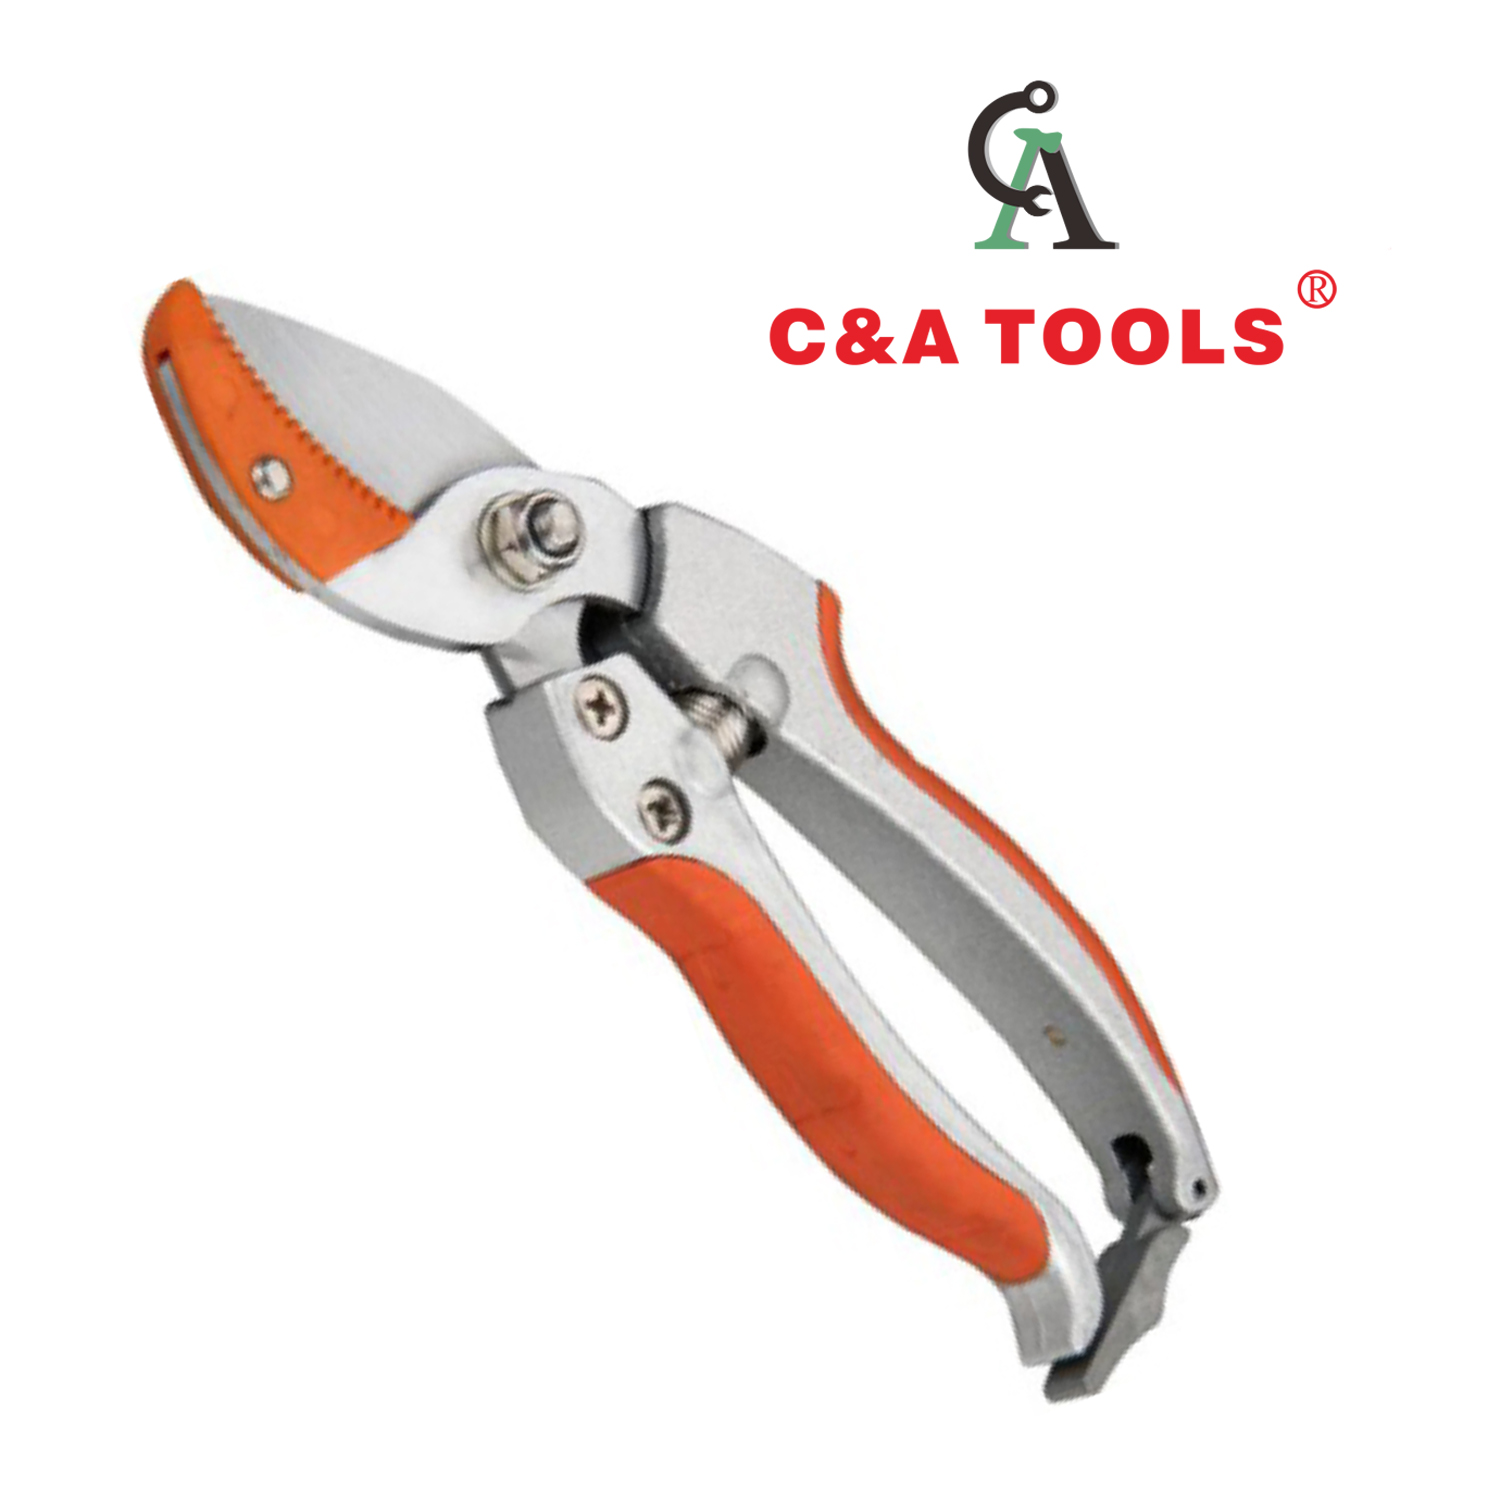 How To Use Pruning Shears?